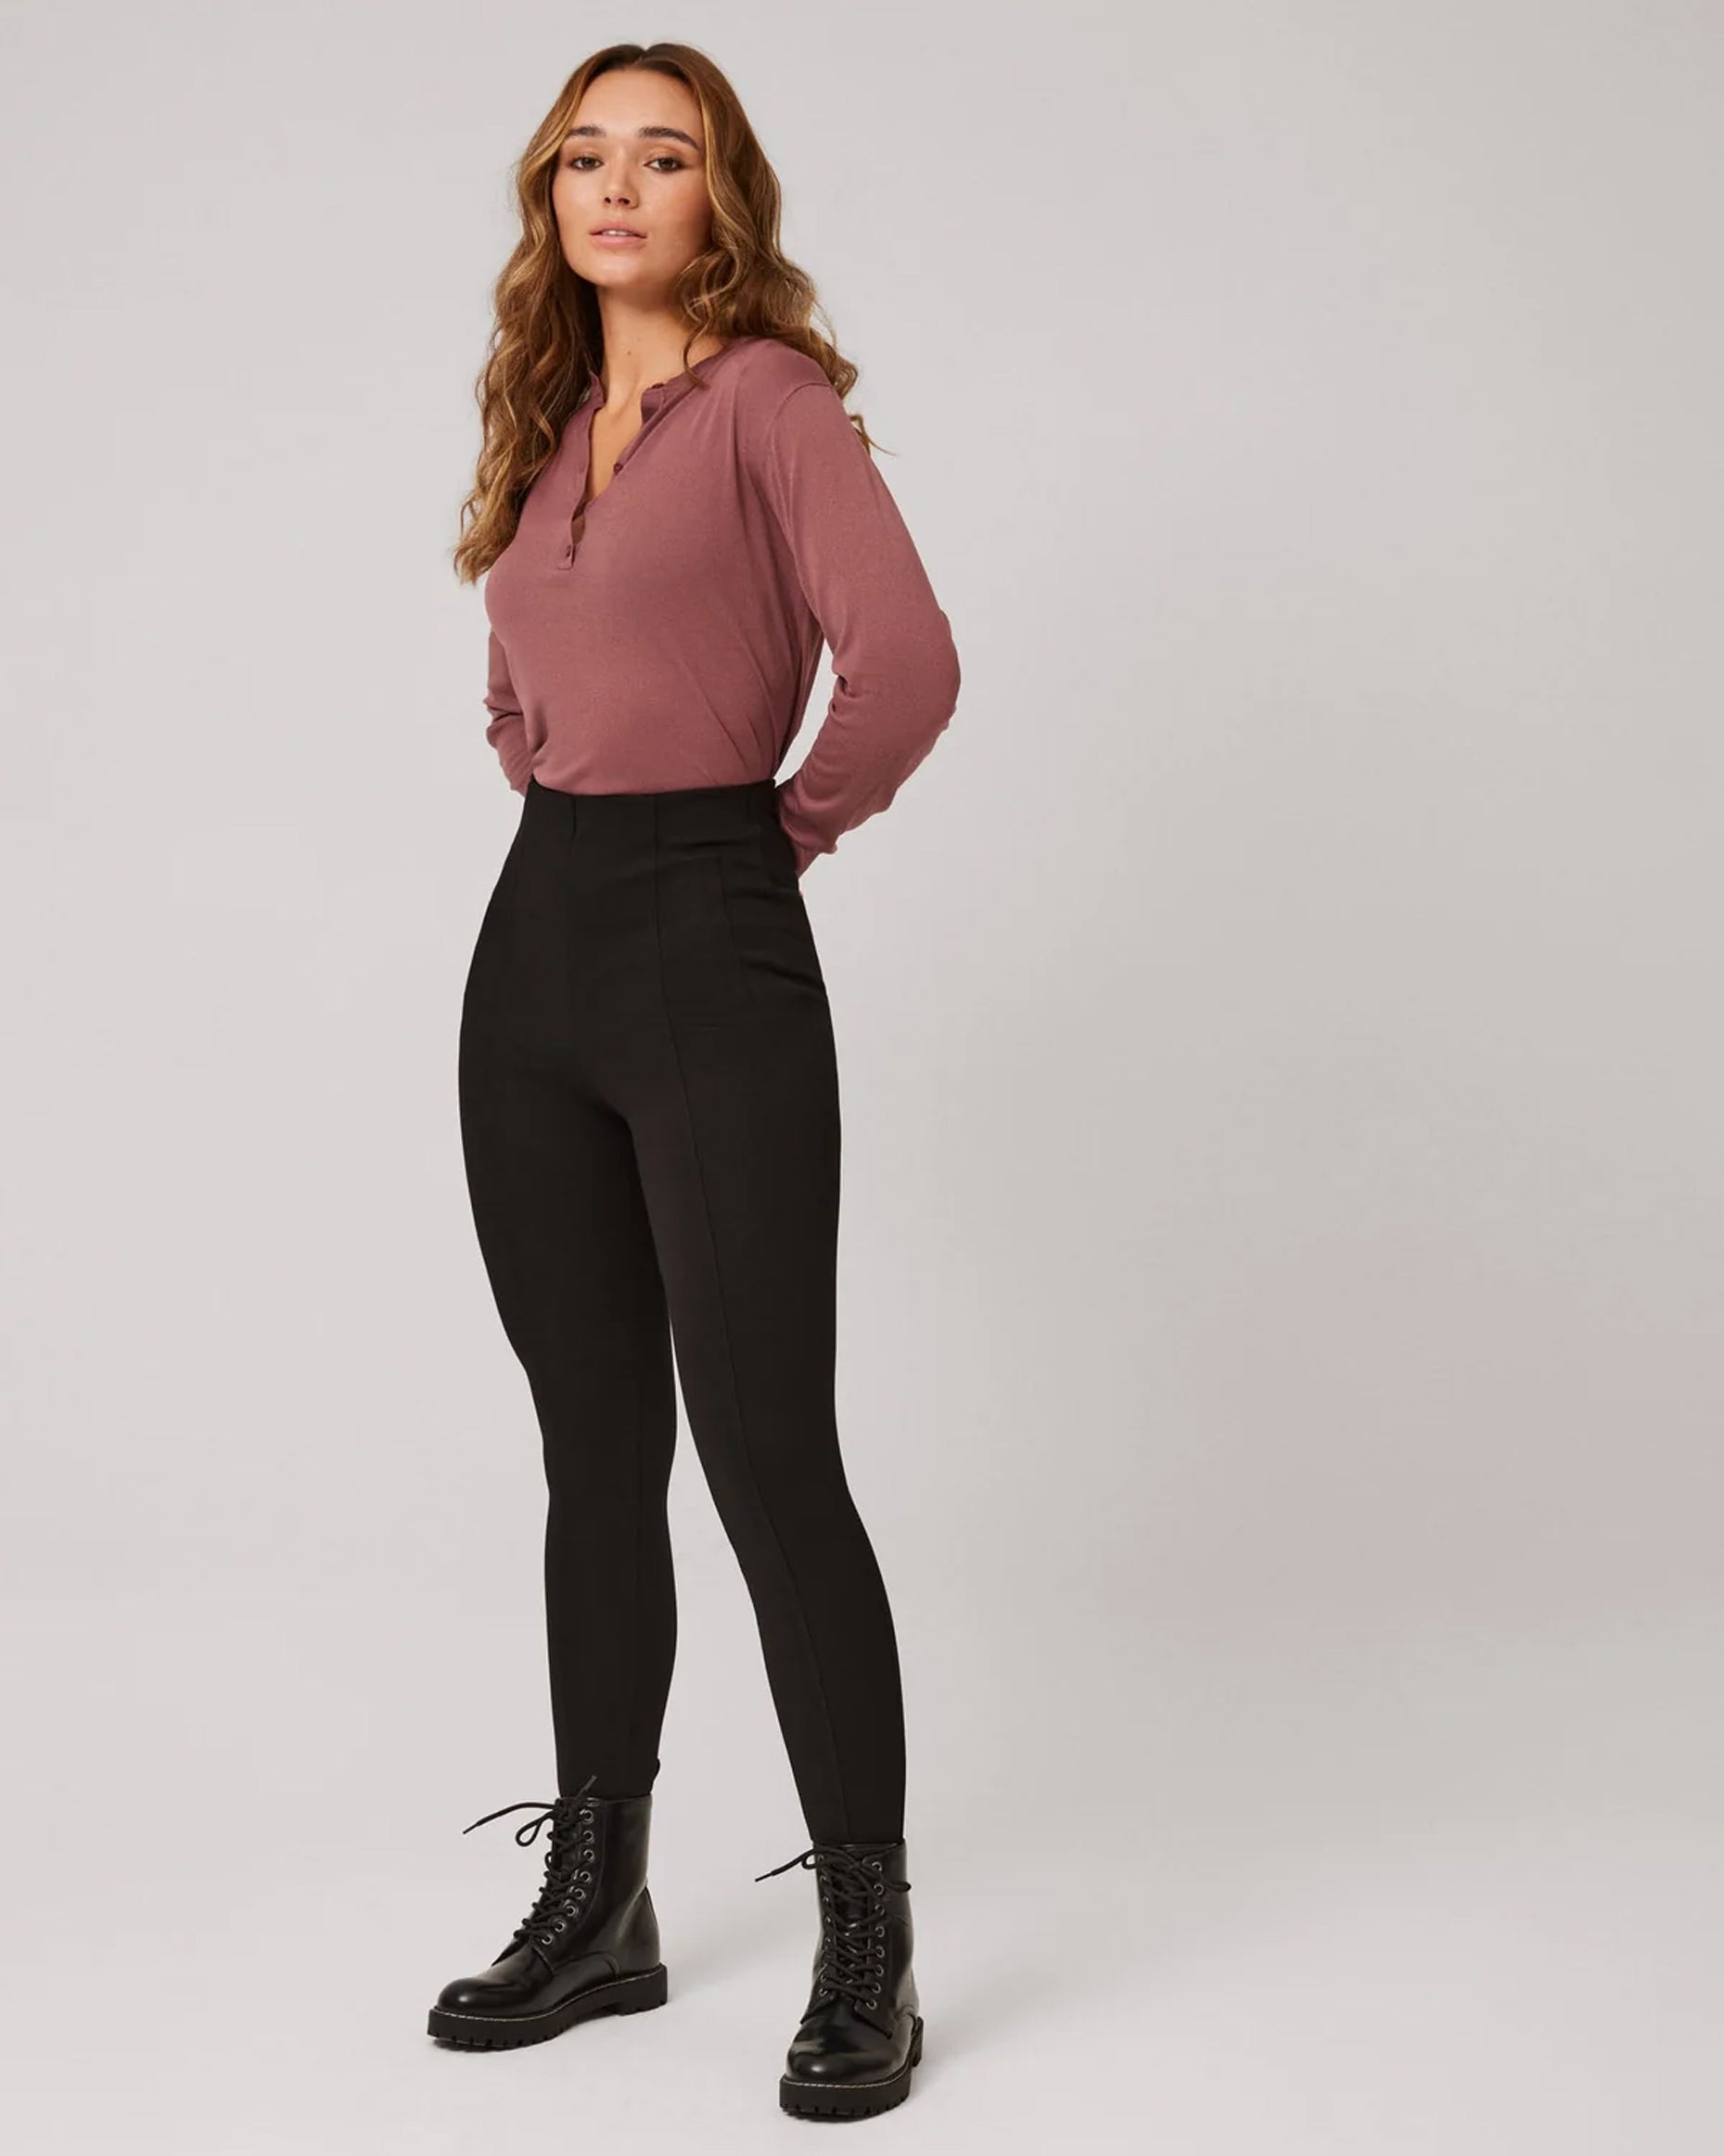 Ysabel Mora 70290 High Rise Treggings - Black high waisted trouser leggings (treggings) with shaped darted waist and centre seams down the front of the leg, worn with black lace up boots and dirty pink long sleeve top.